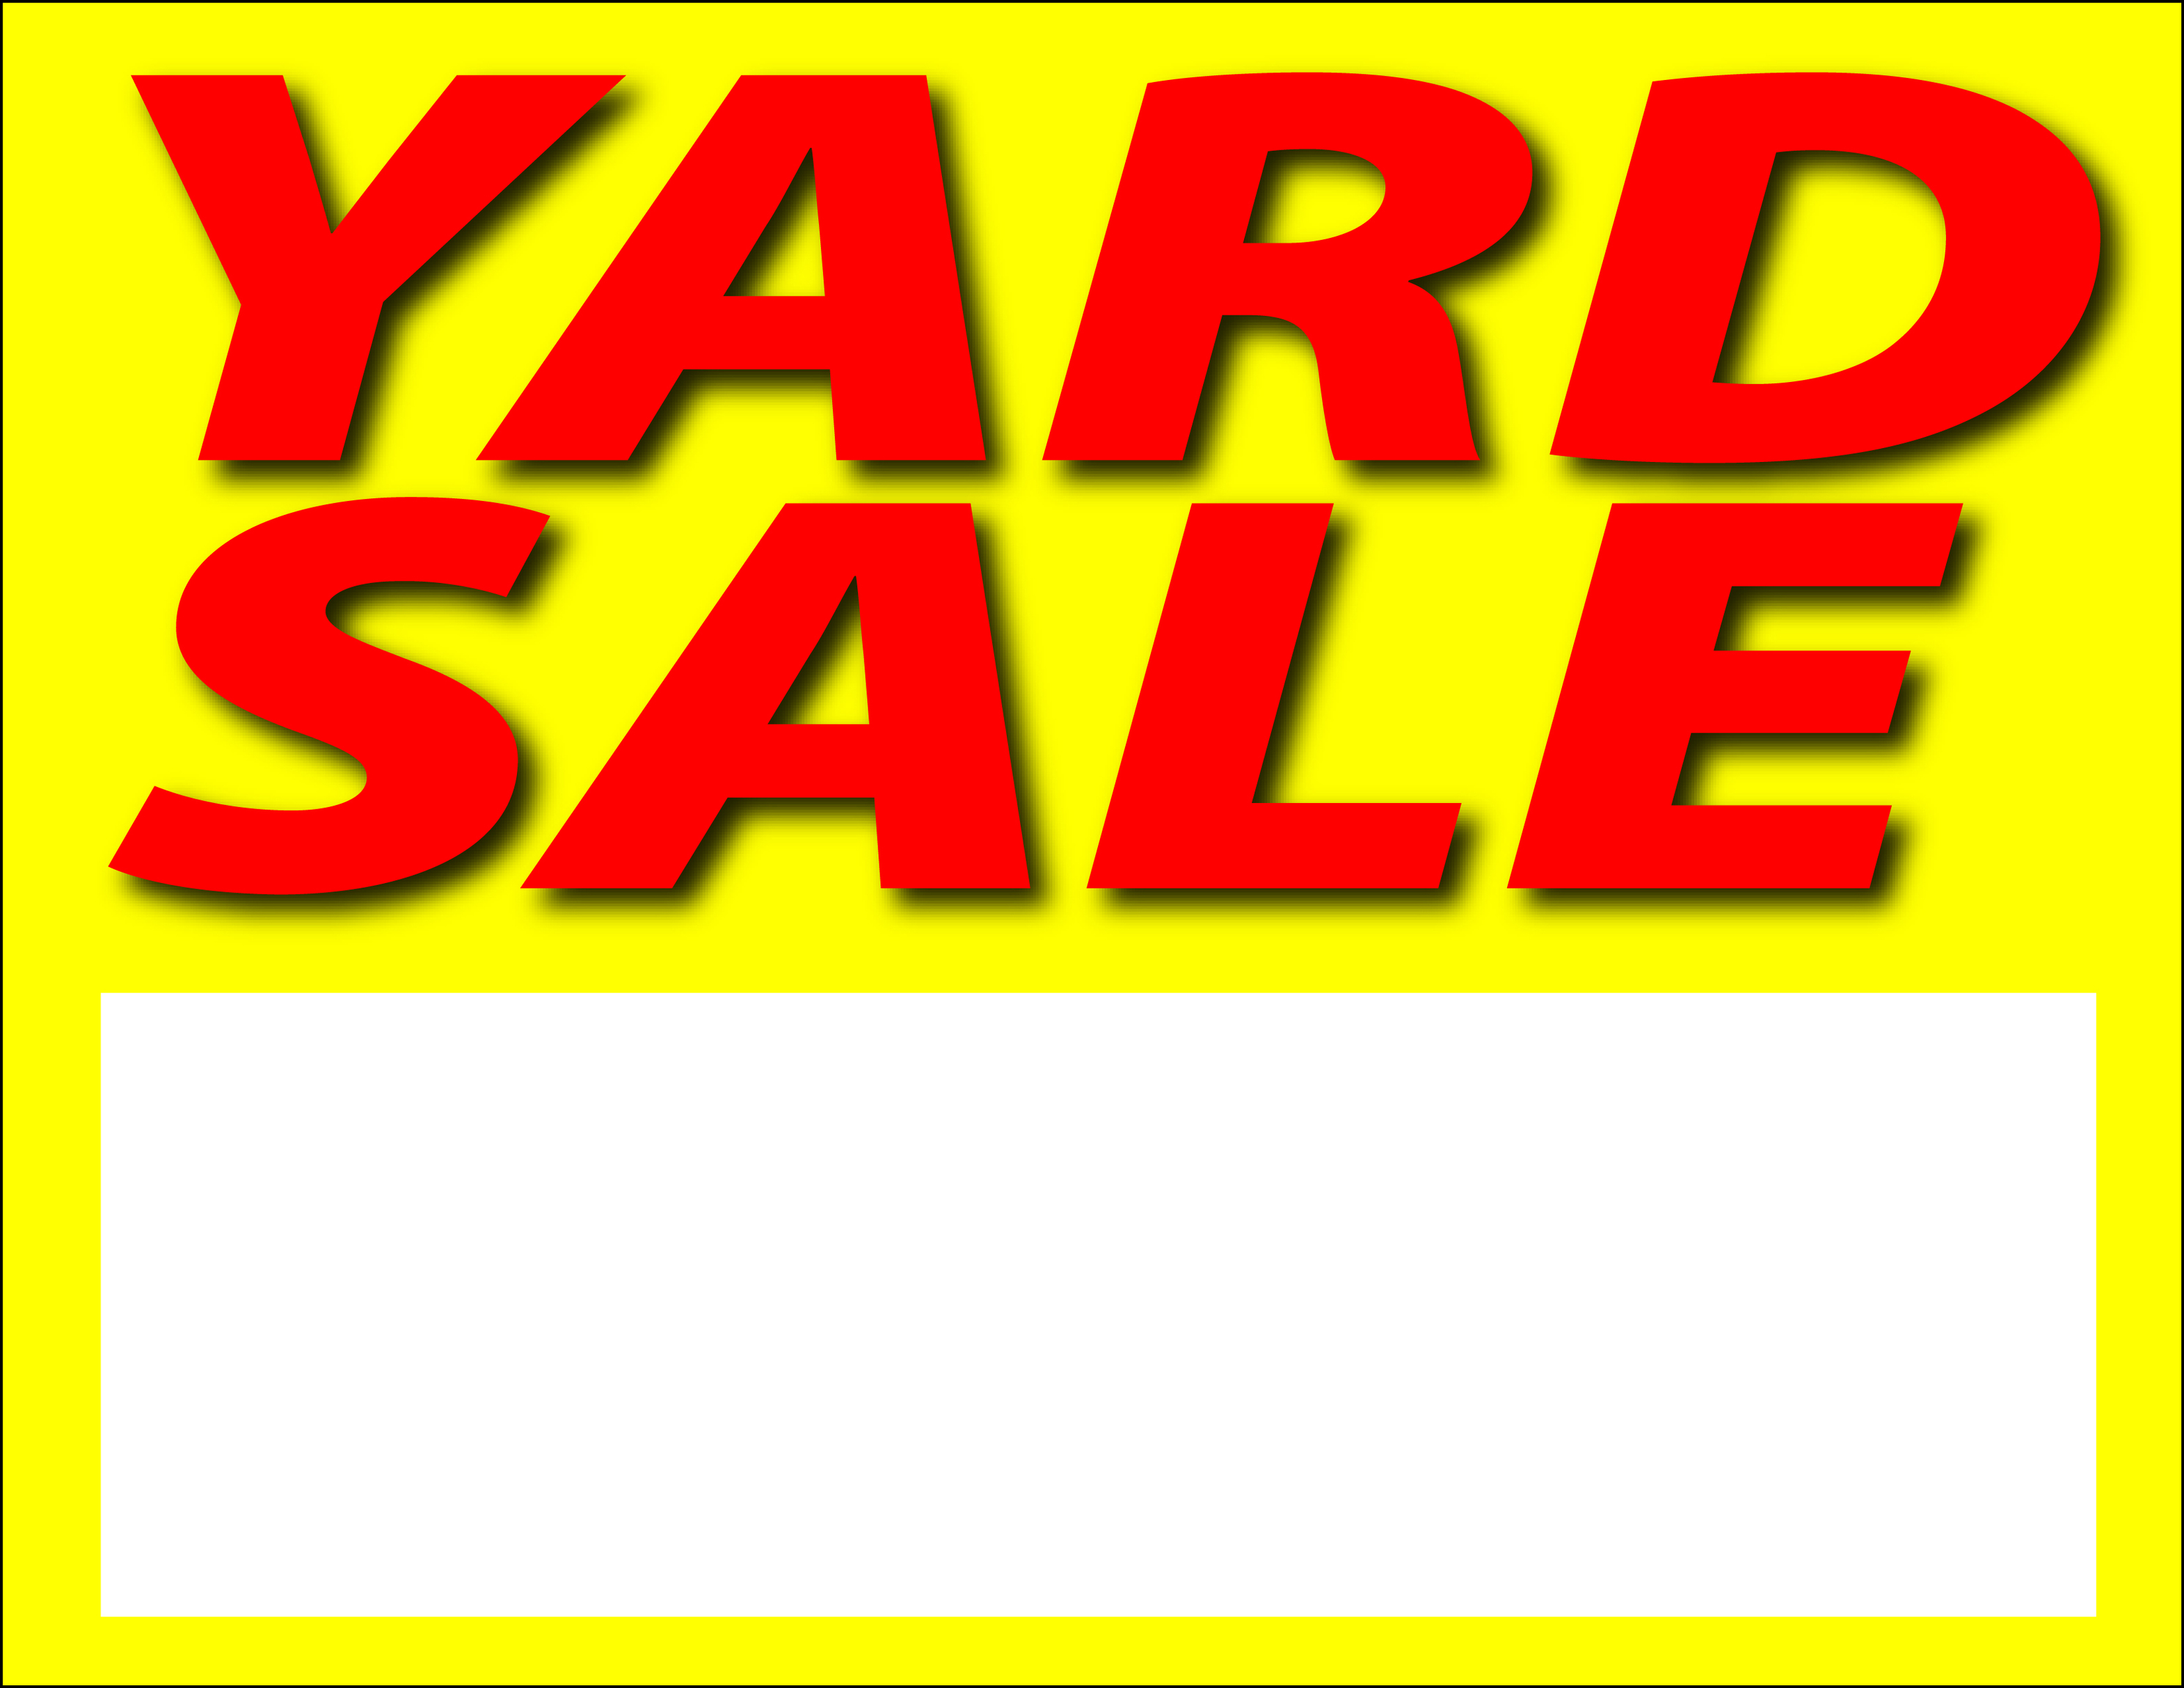 Yard Sale Signs Templates